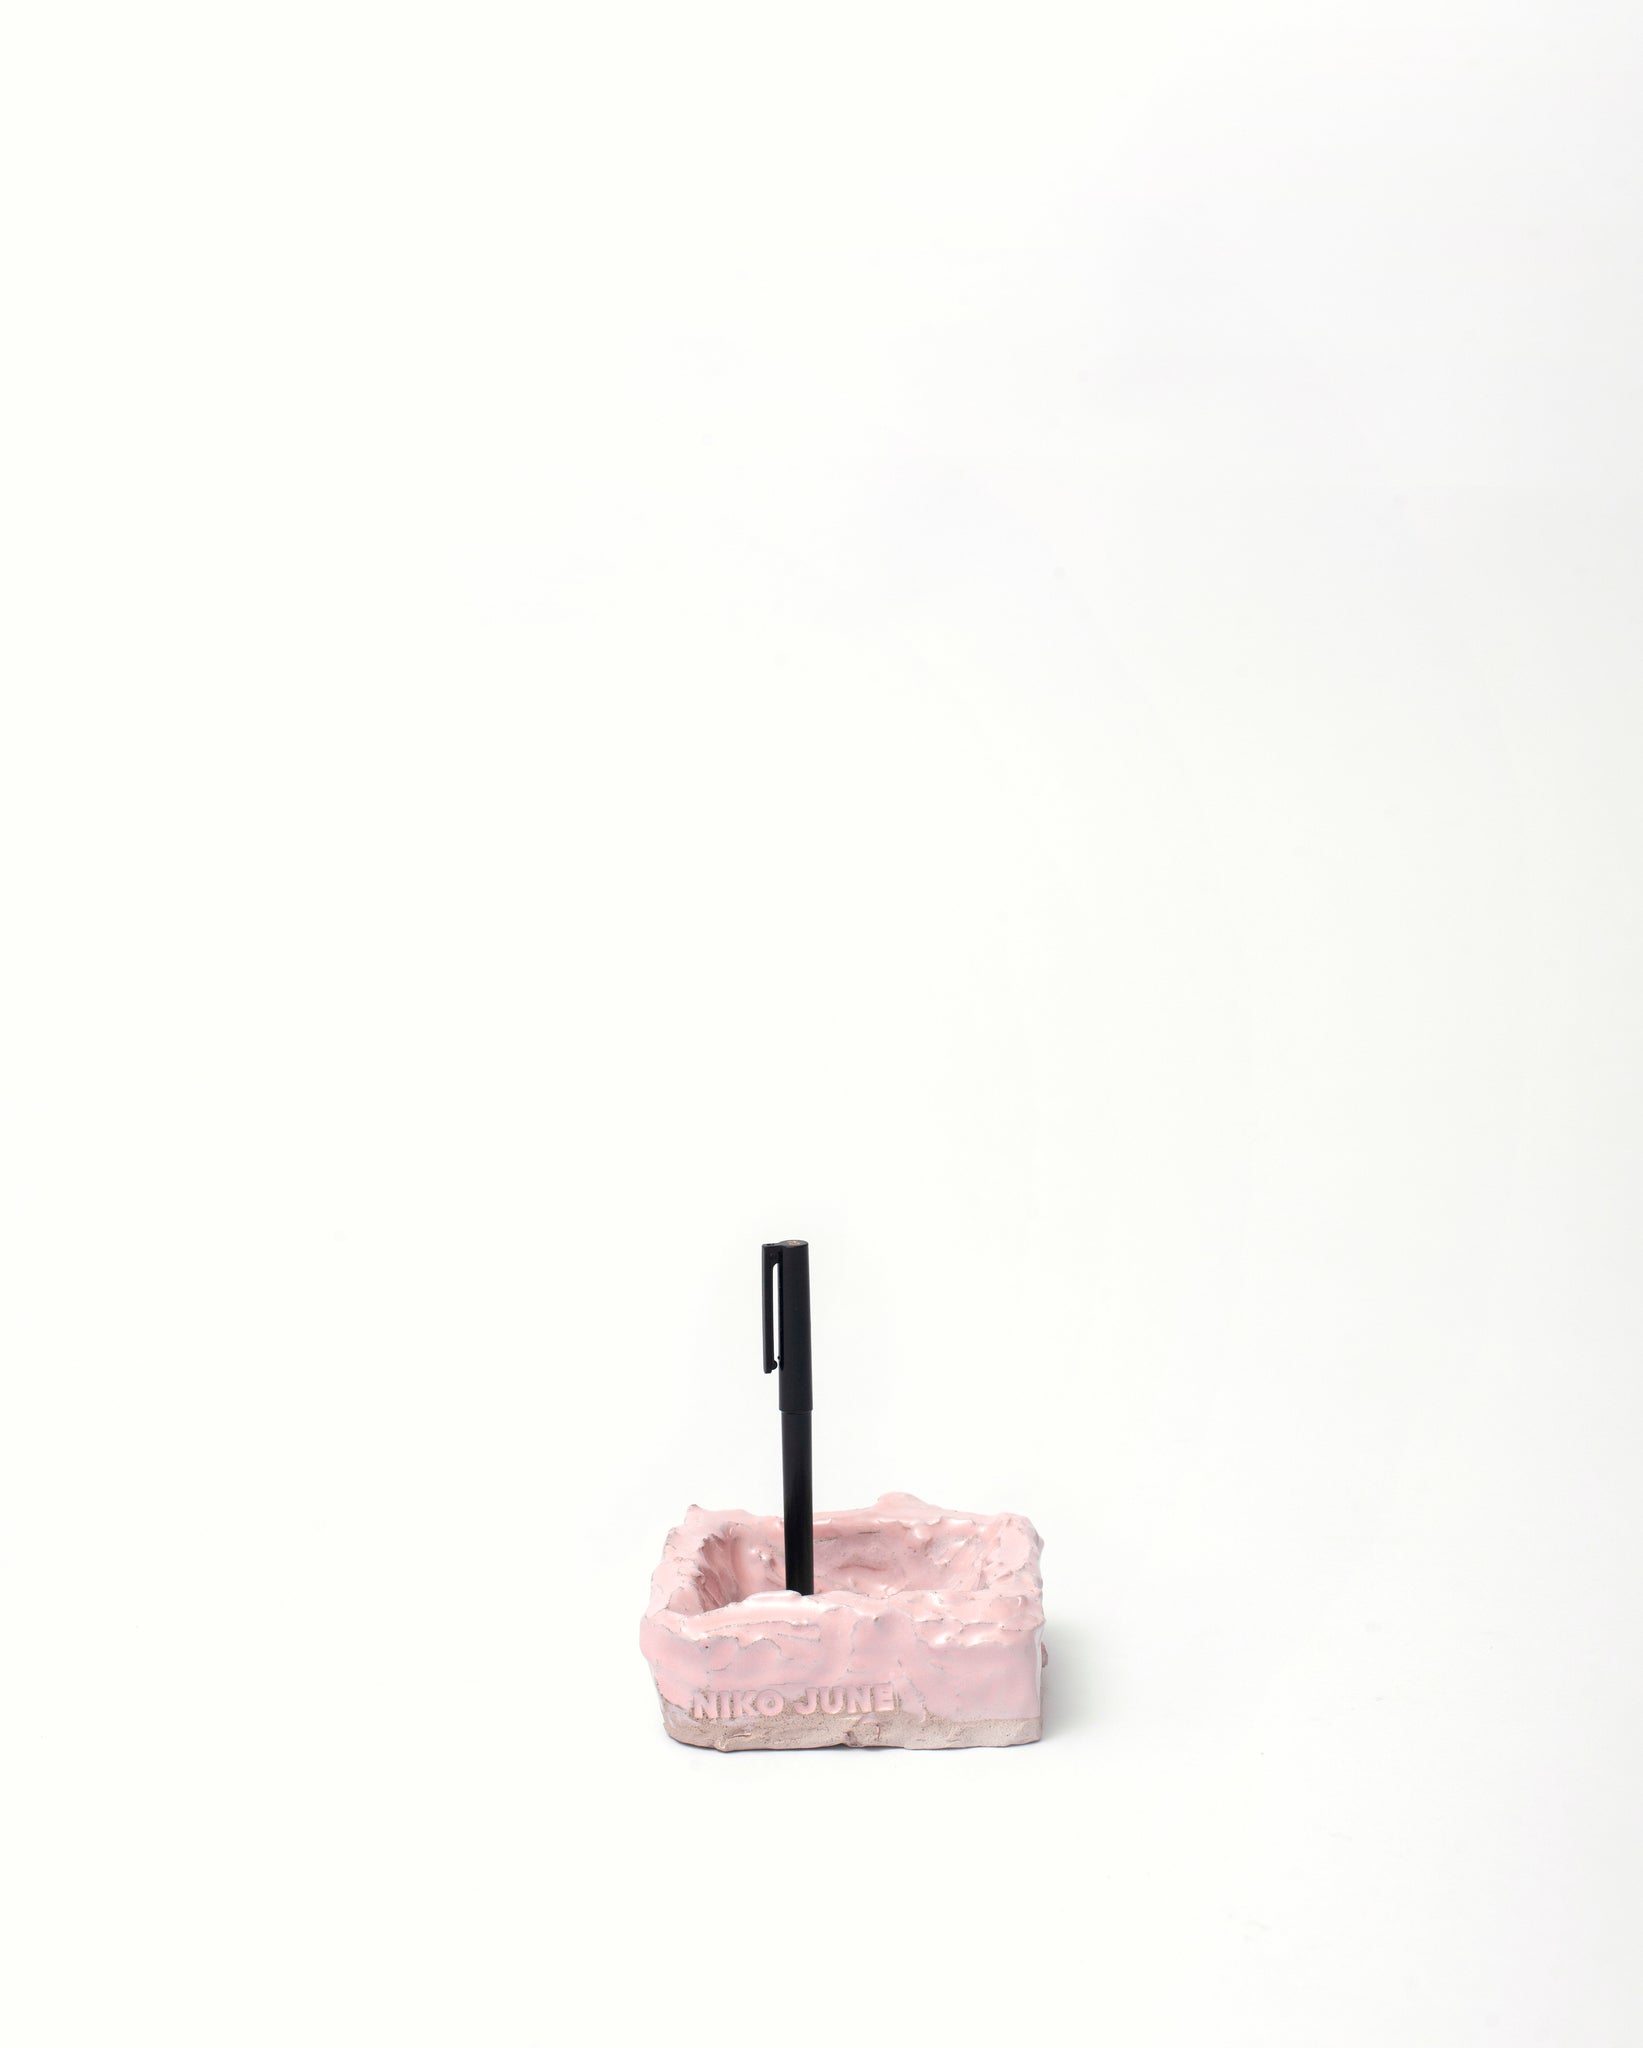 White background, Handmade jewelry ceramic organizer pink with black pen inside in vertical position